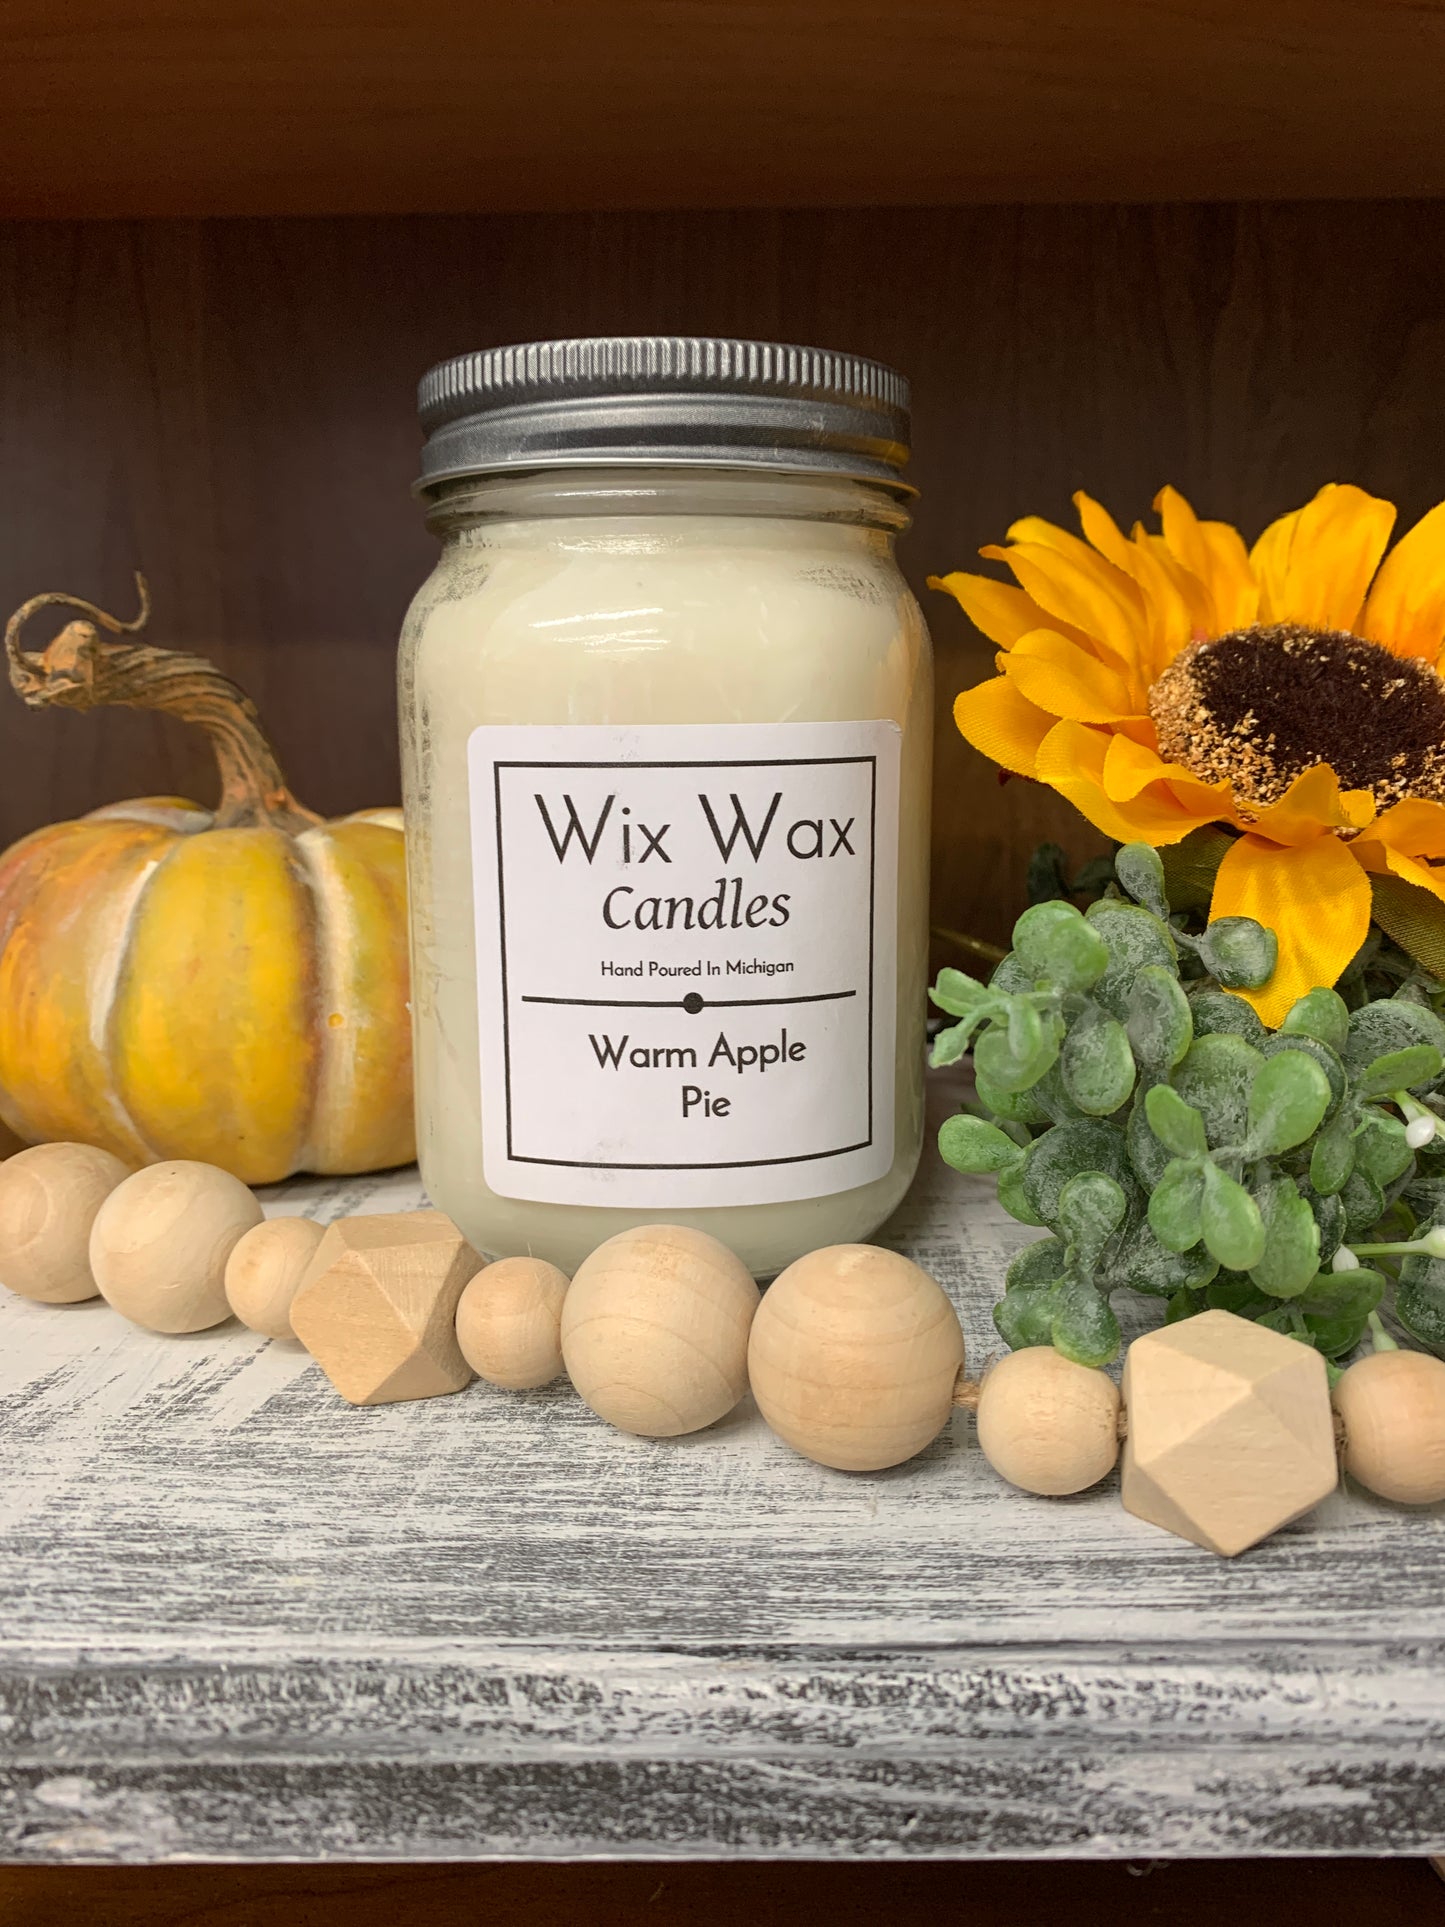 Wix Wax Hand Poured Candles